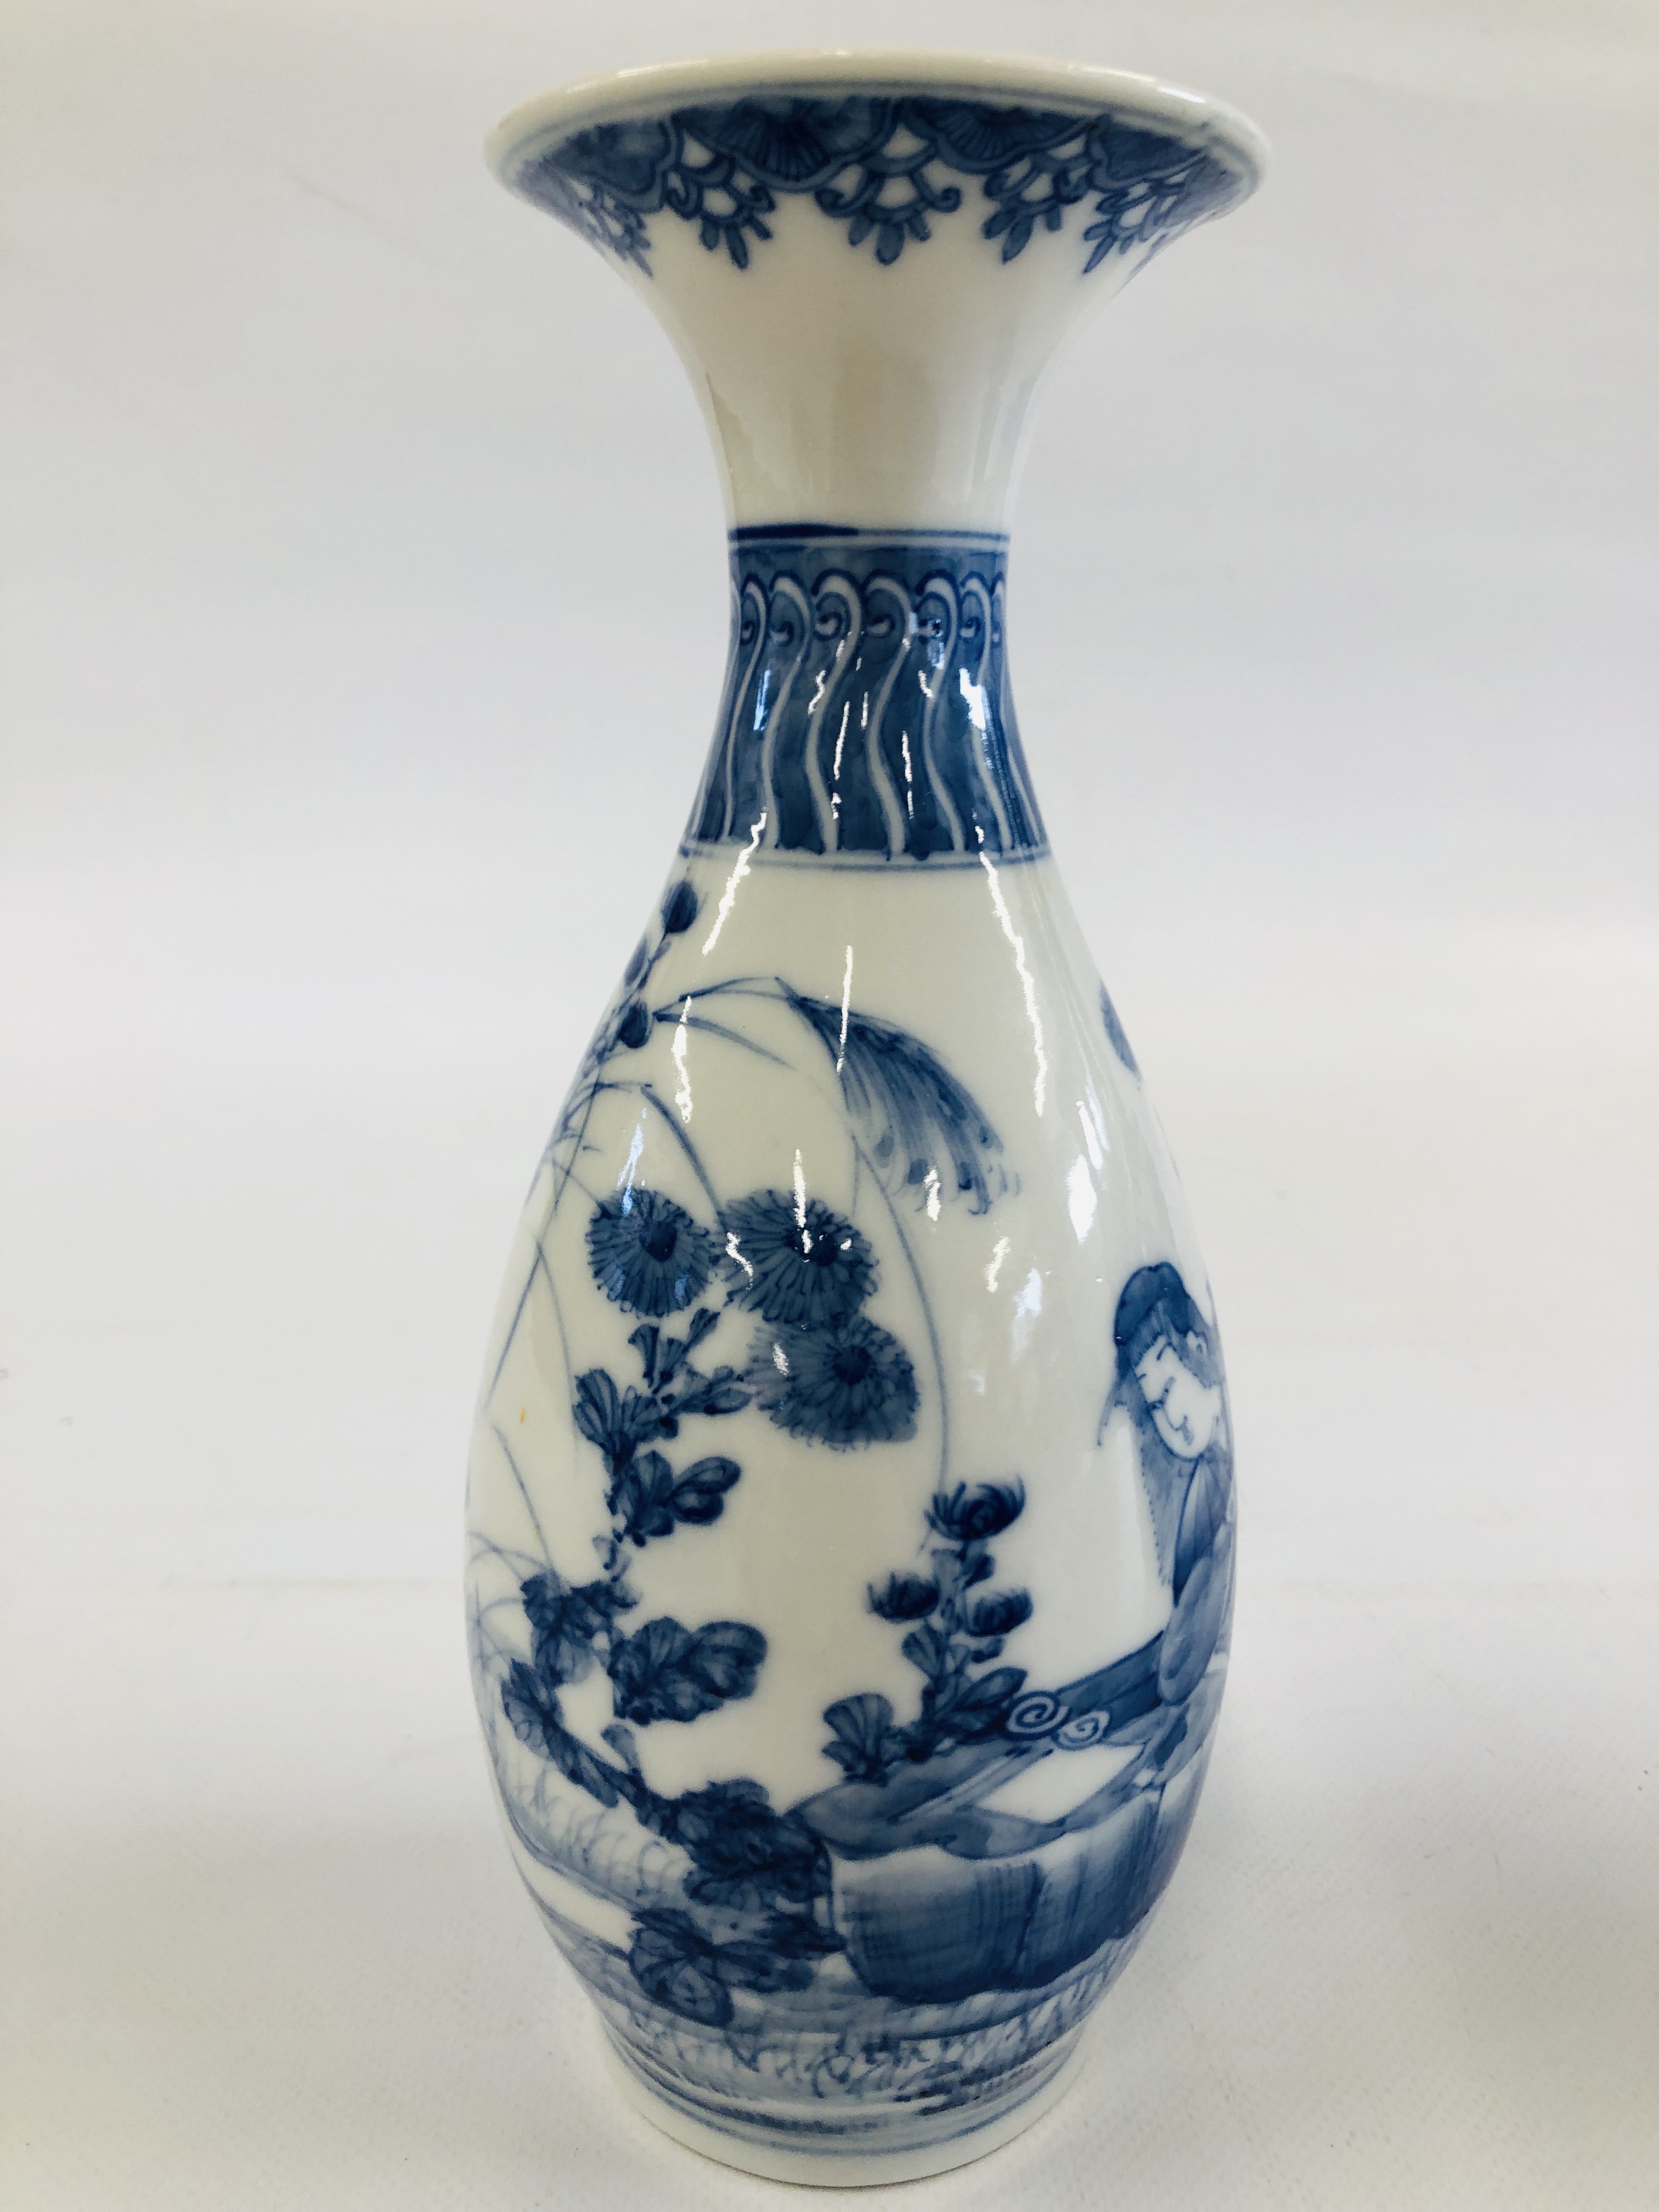 A PAIR OF DECORATIVE BLUE AND WHITE ORIENTAL VASES DEPICTING A PREGNANT WOMAN SEATED AMONGST THE - Image 11 of 13